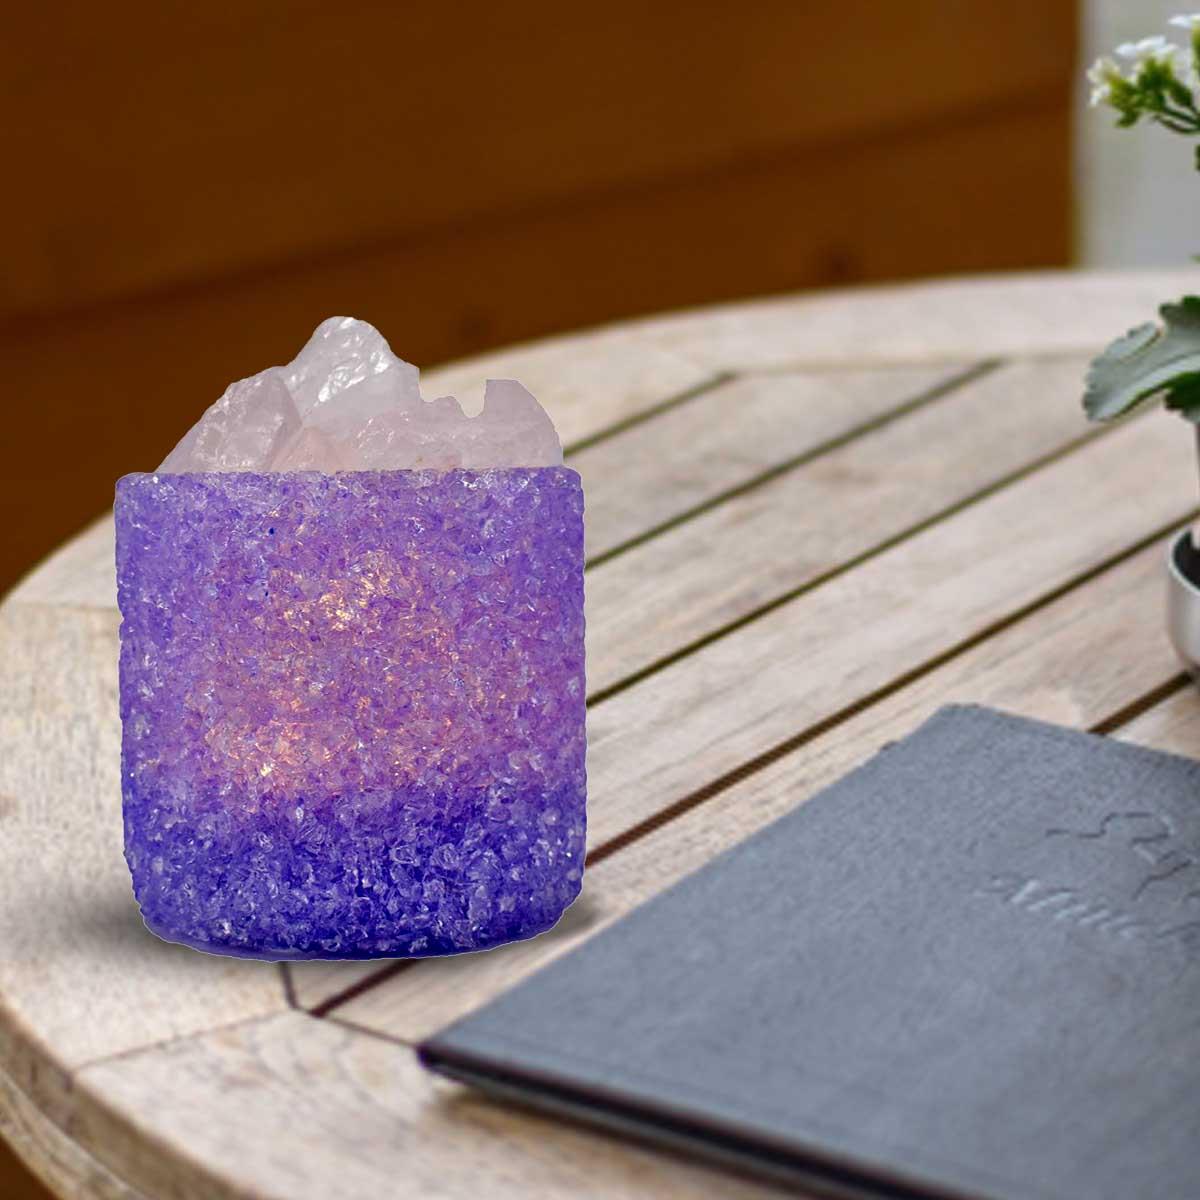 Kookee Natural Crystal Aromatherapy with Essential Oil, Electric Diffuser and LED Light Suitable for Home, Office, Spa for Claming, Soothing and Relaxing (087-3-B)